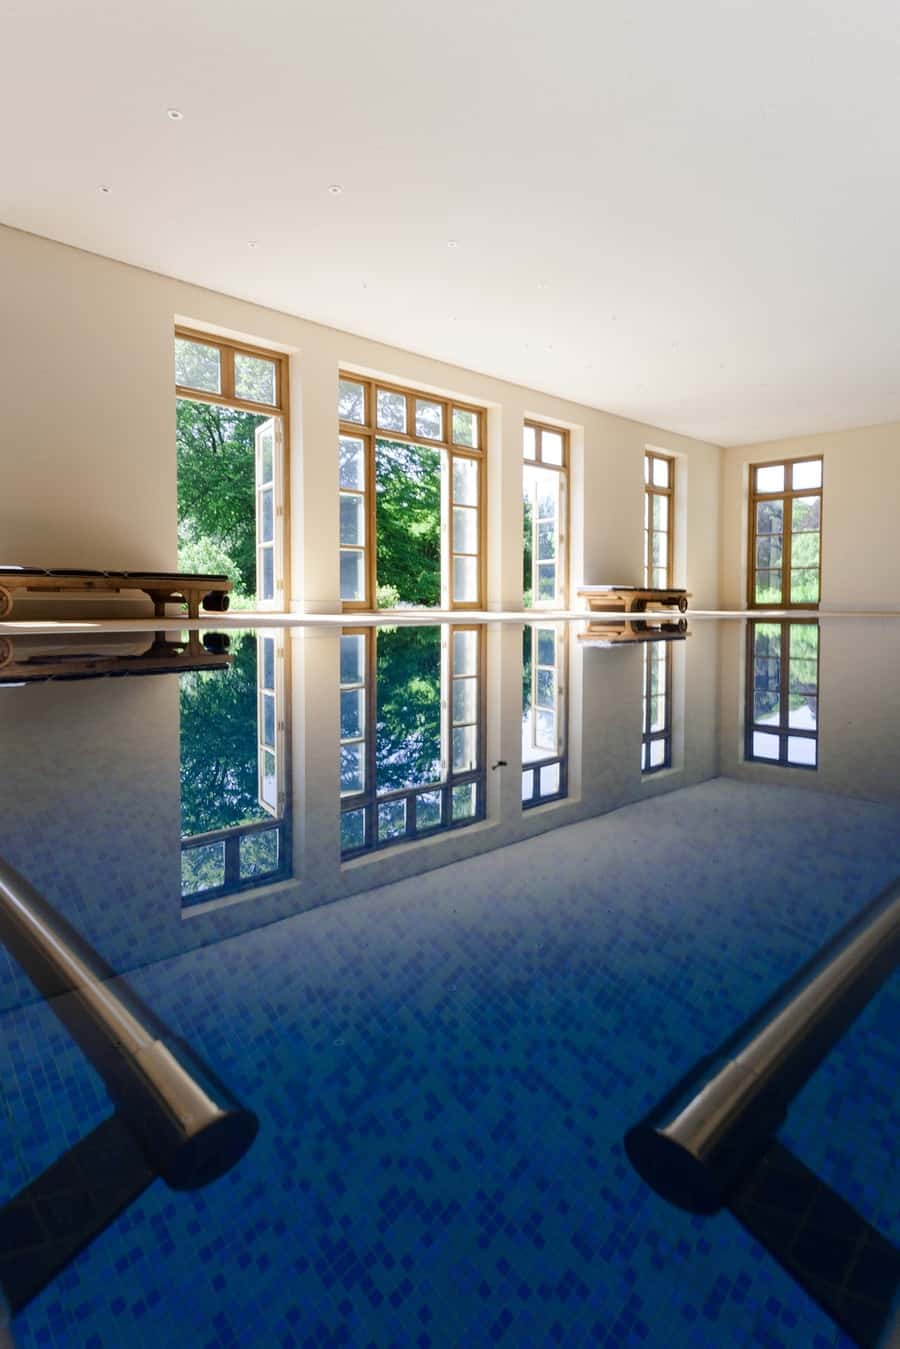  Picture of a swimming pool by Rick McEvoy - interior photographer in Dorset 